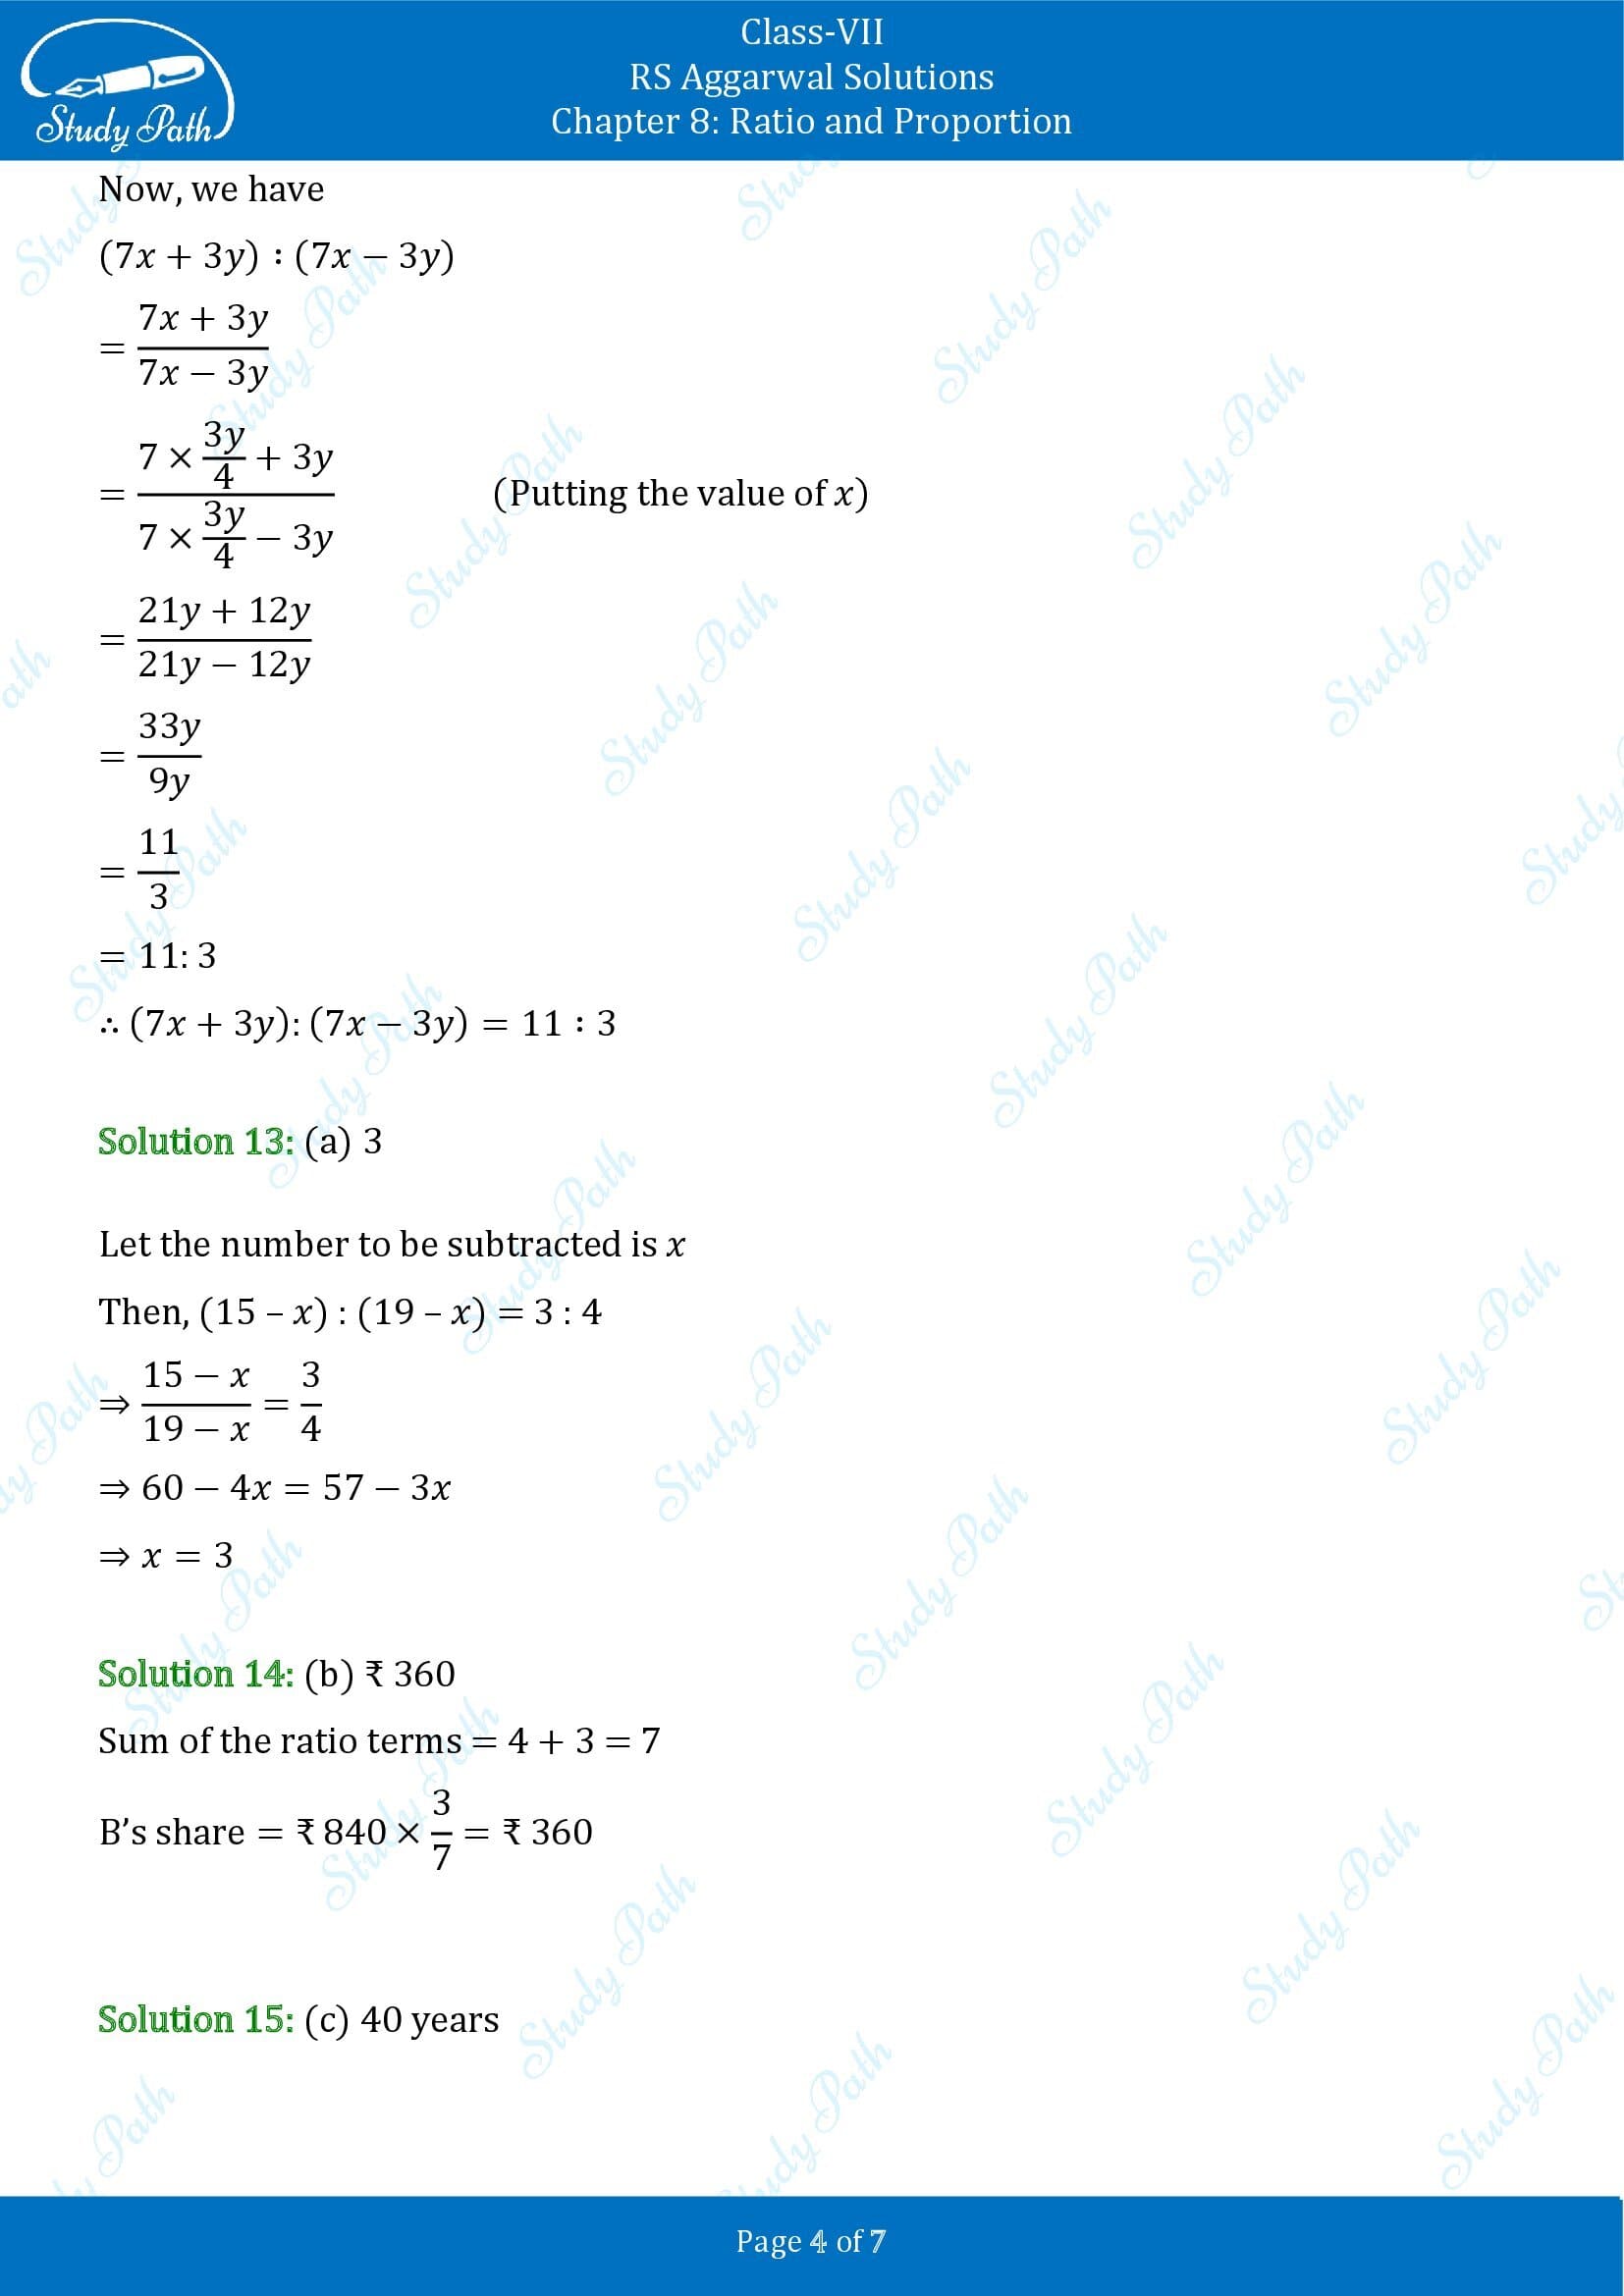 RS Aggarwal Solutions Class 7 Chapter 8 Ratio and Proportion Test Paper 00004